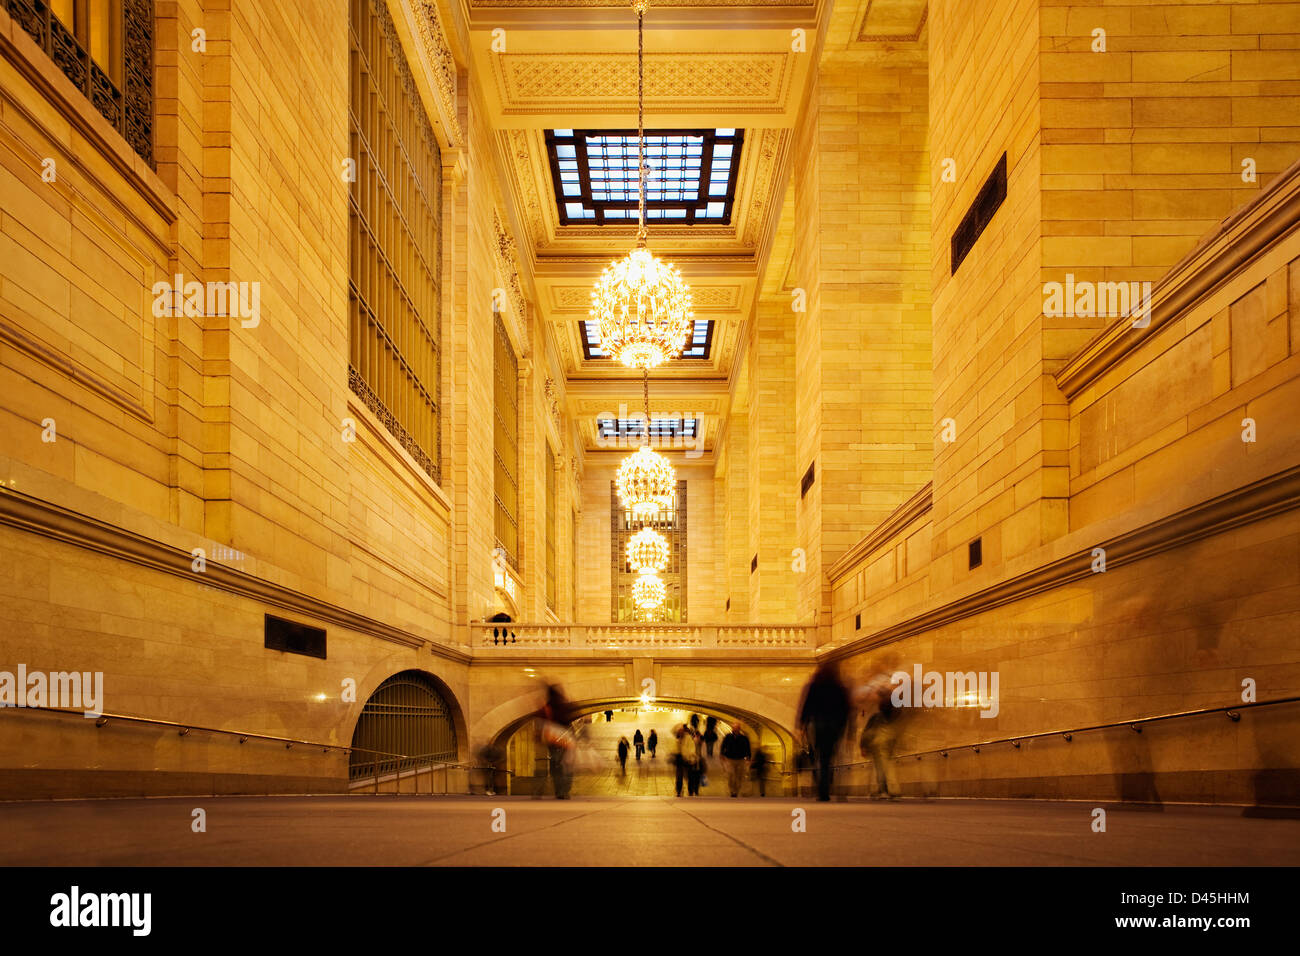 Grand Central Station in New York City Stock Photo